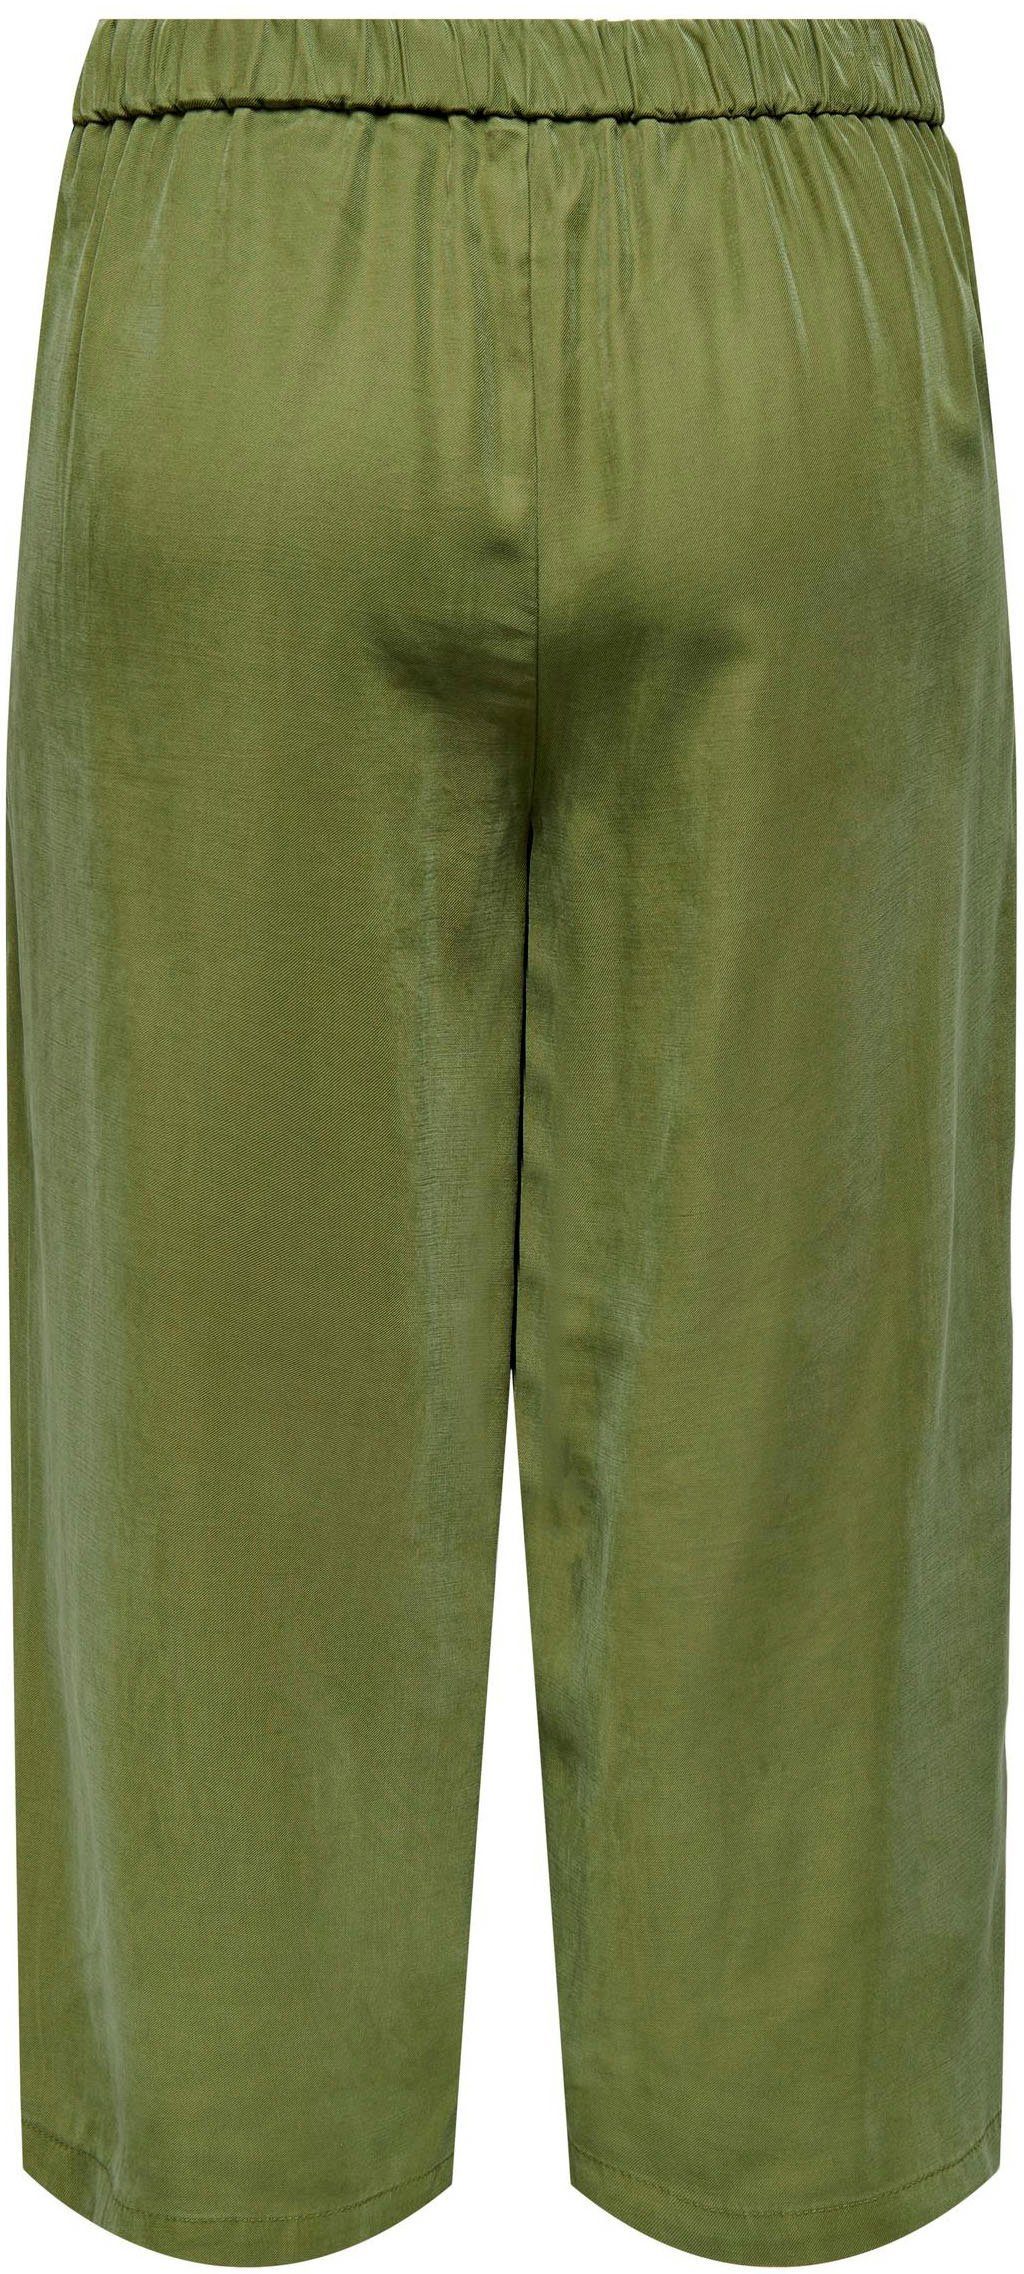 ONLCARISA-MAGO PANT Olive ONLY Culotte Branch 187101 LIFE CULOTTE PNT